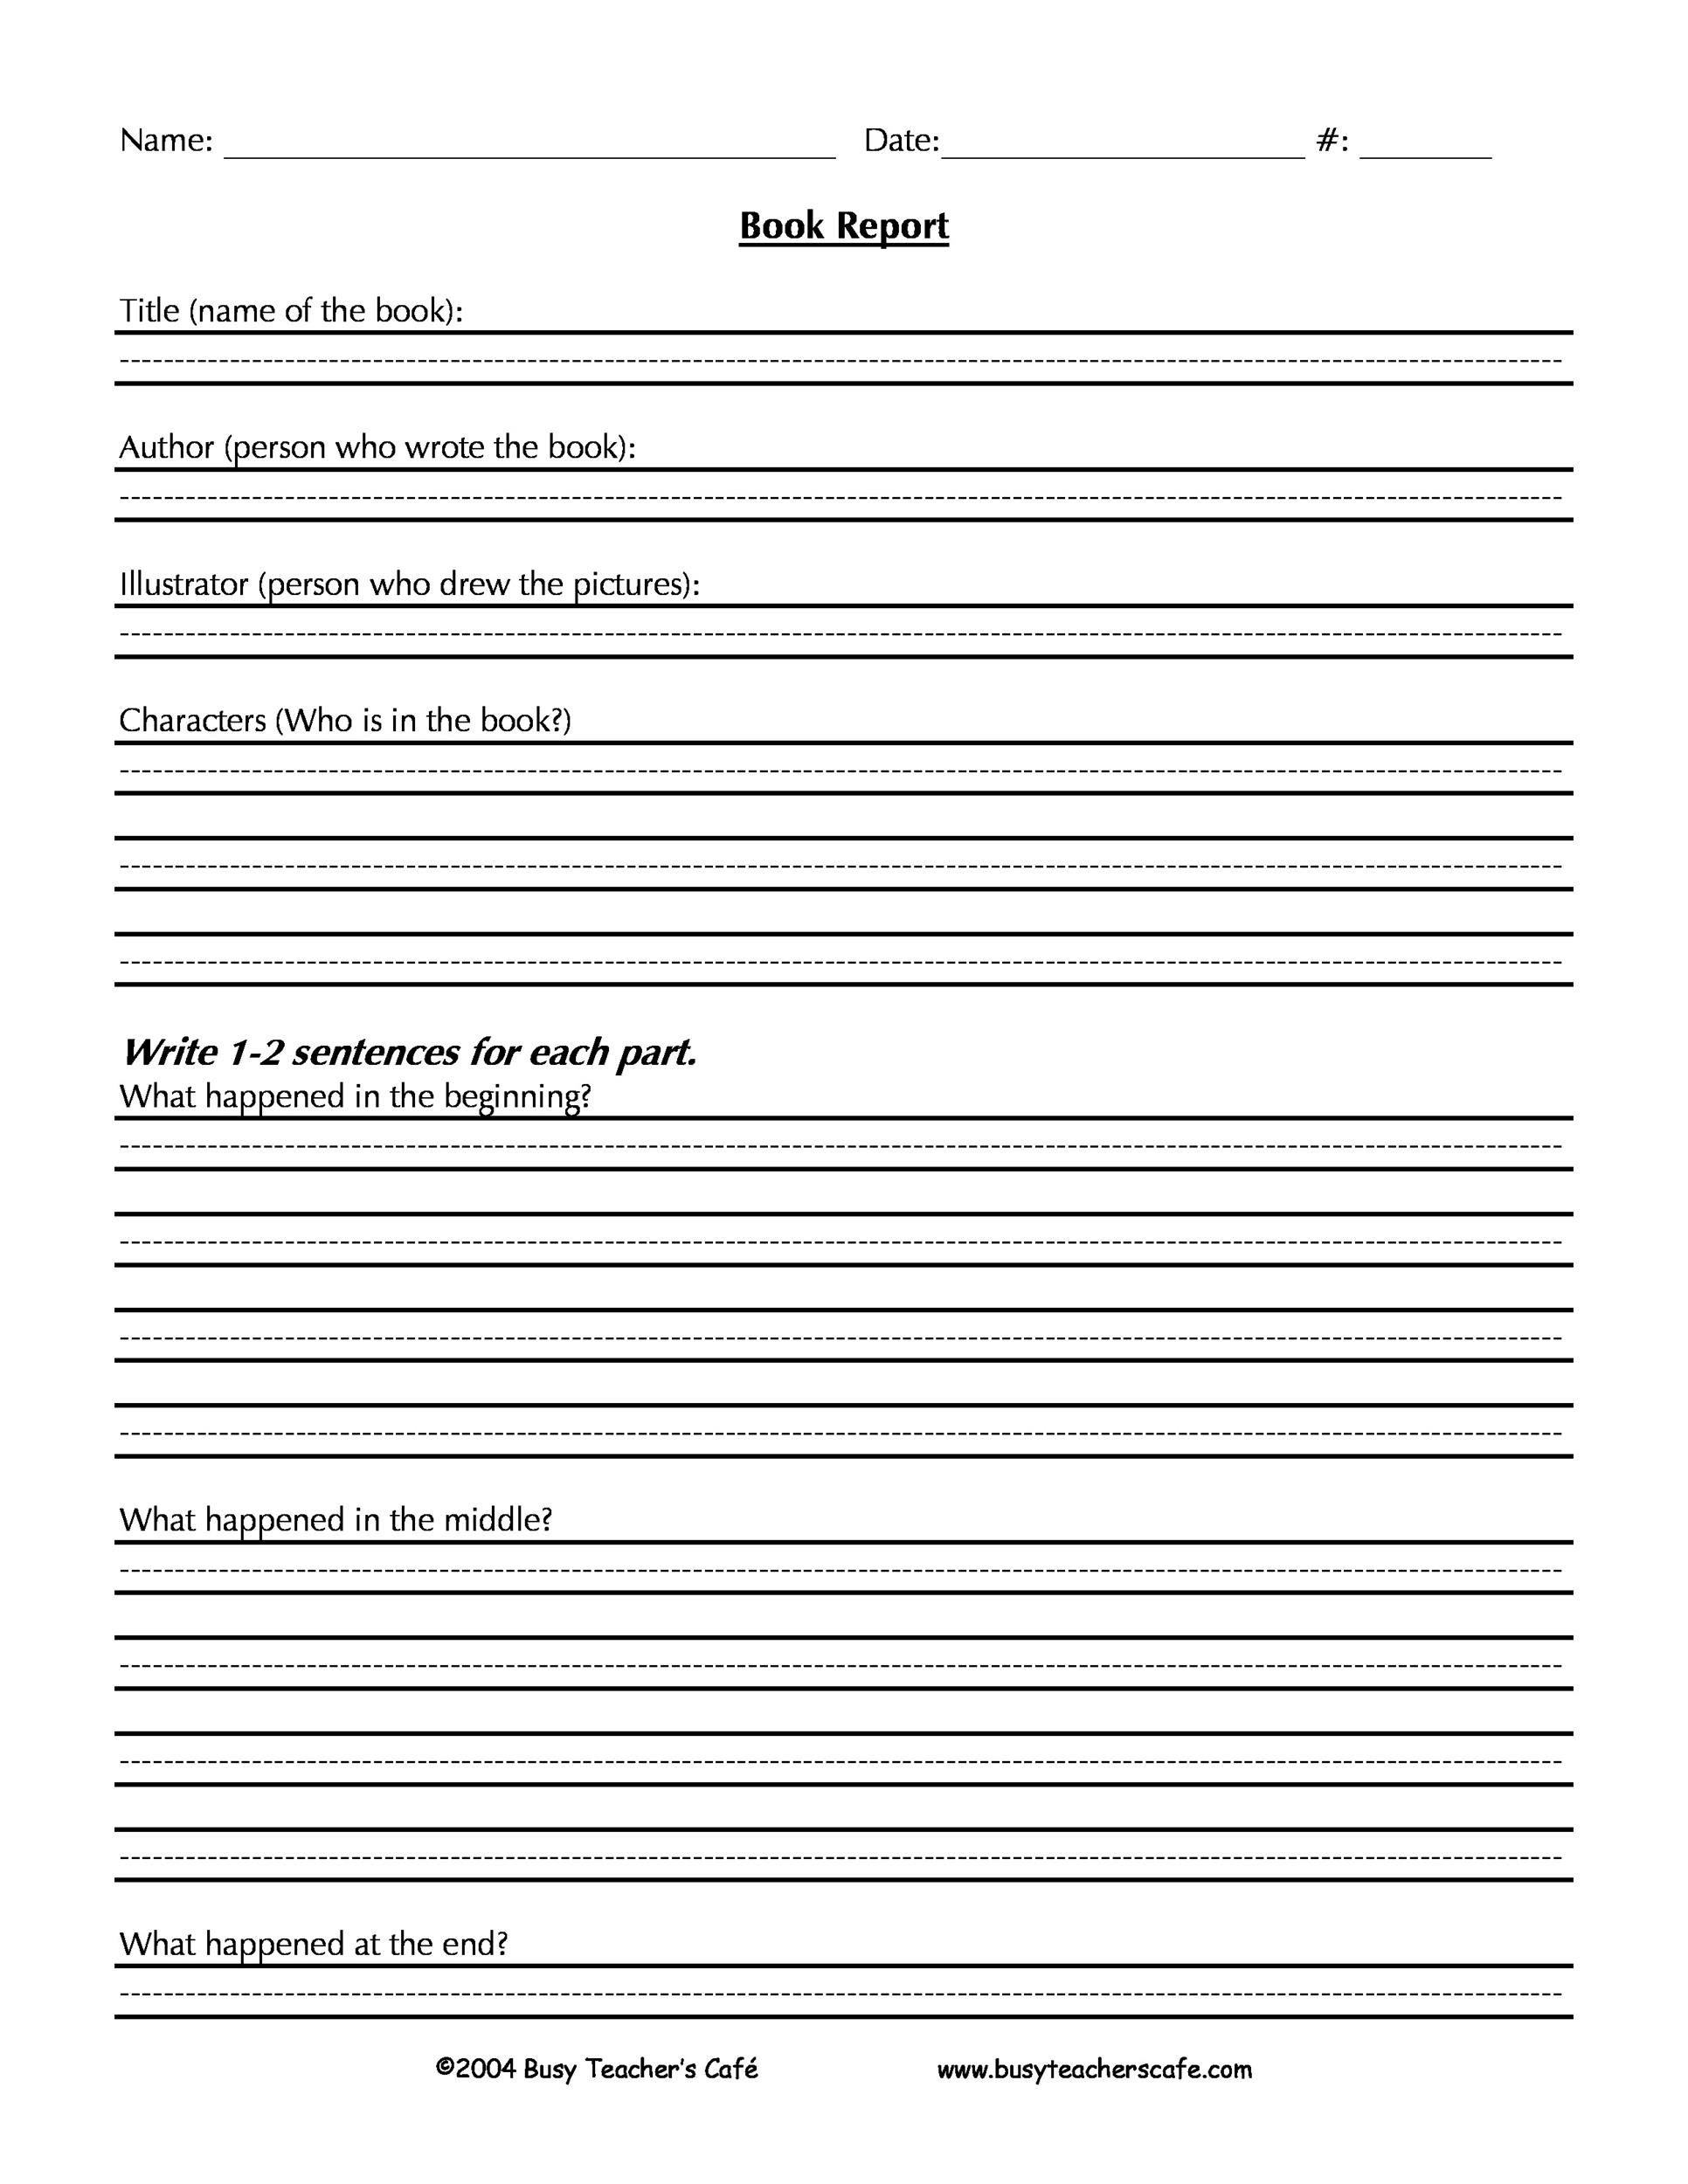 Free Book Report Template 29